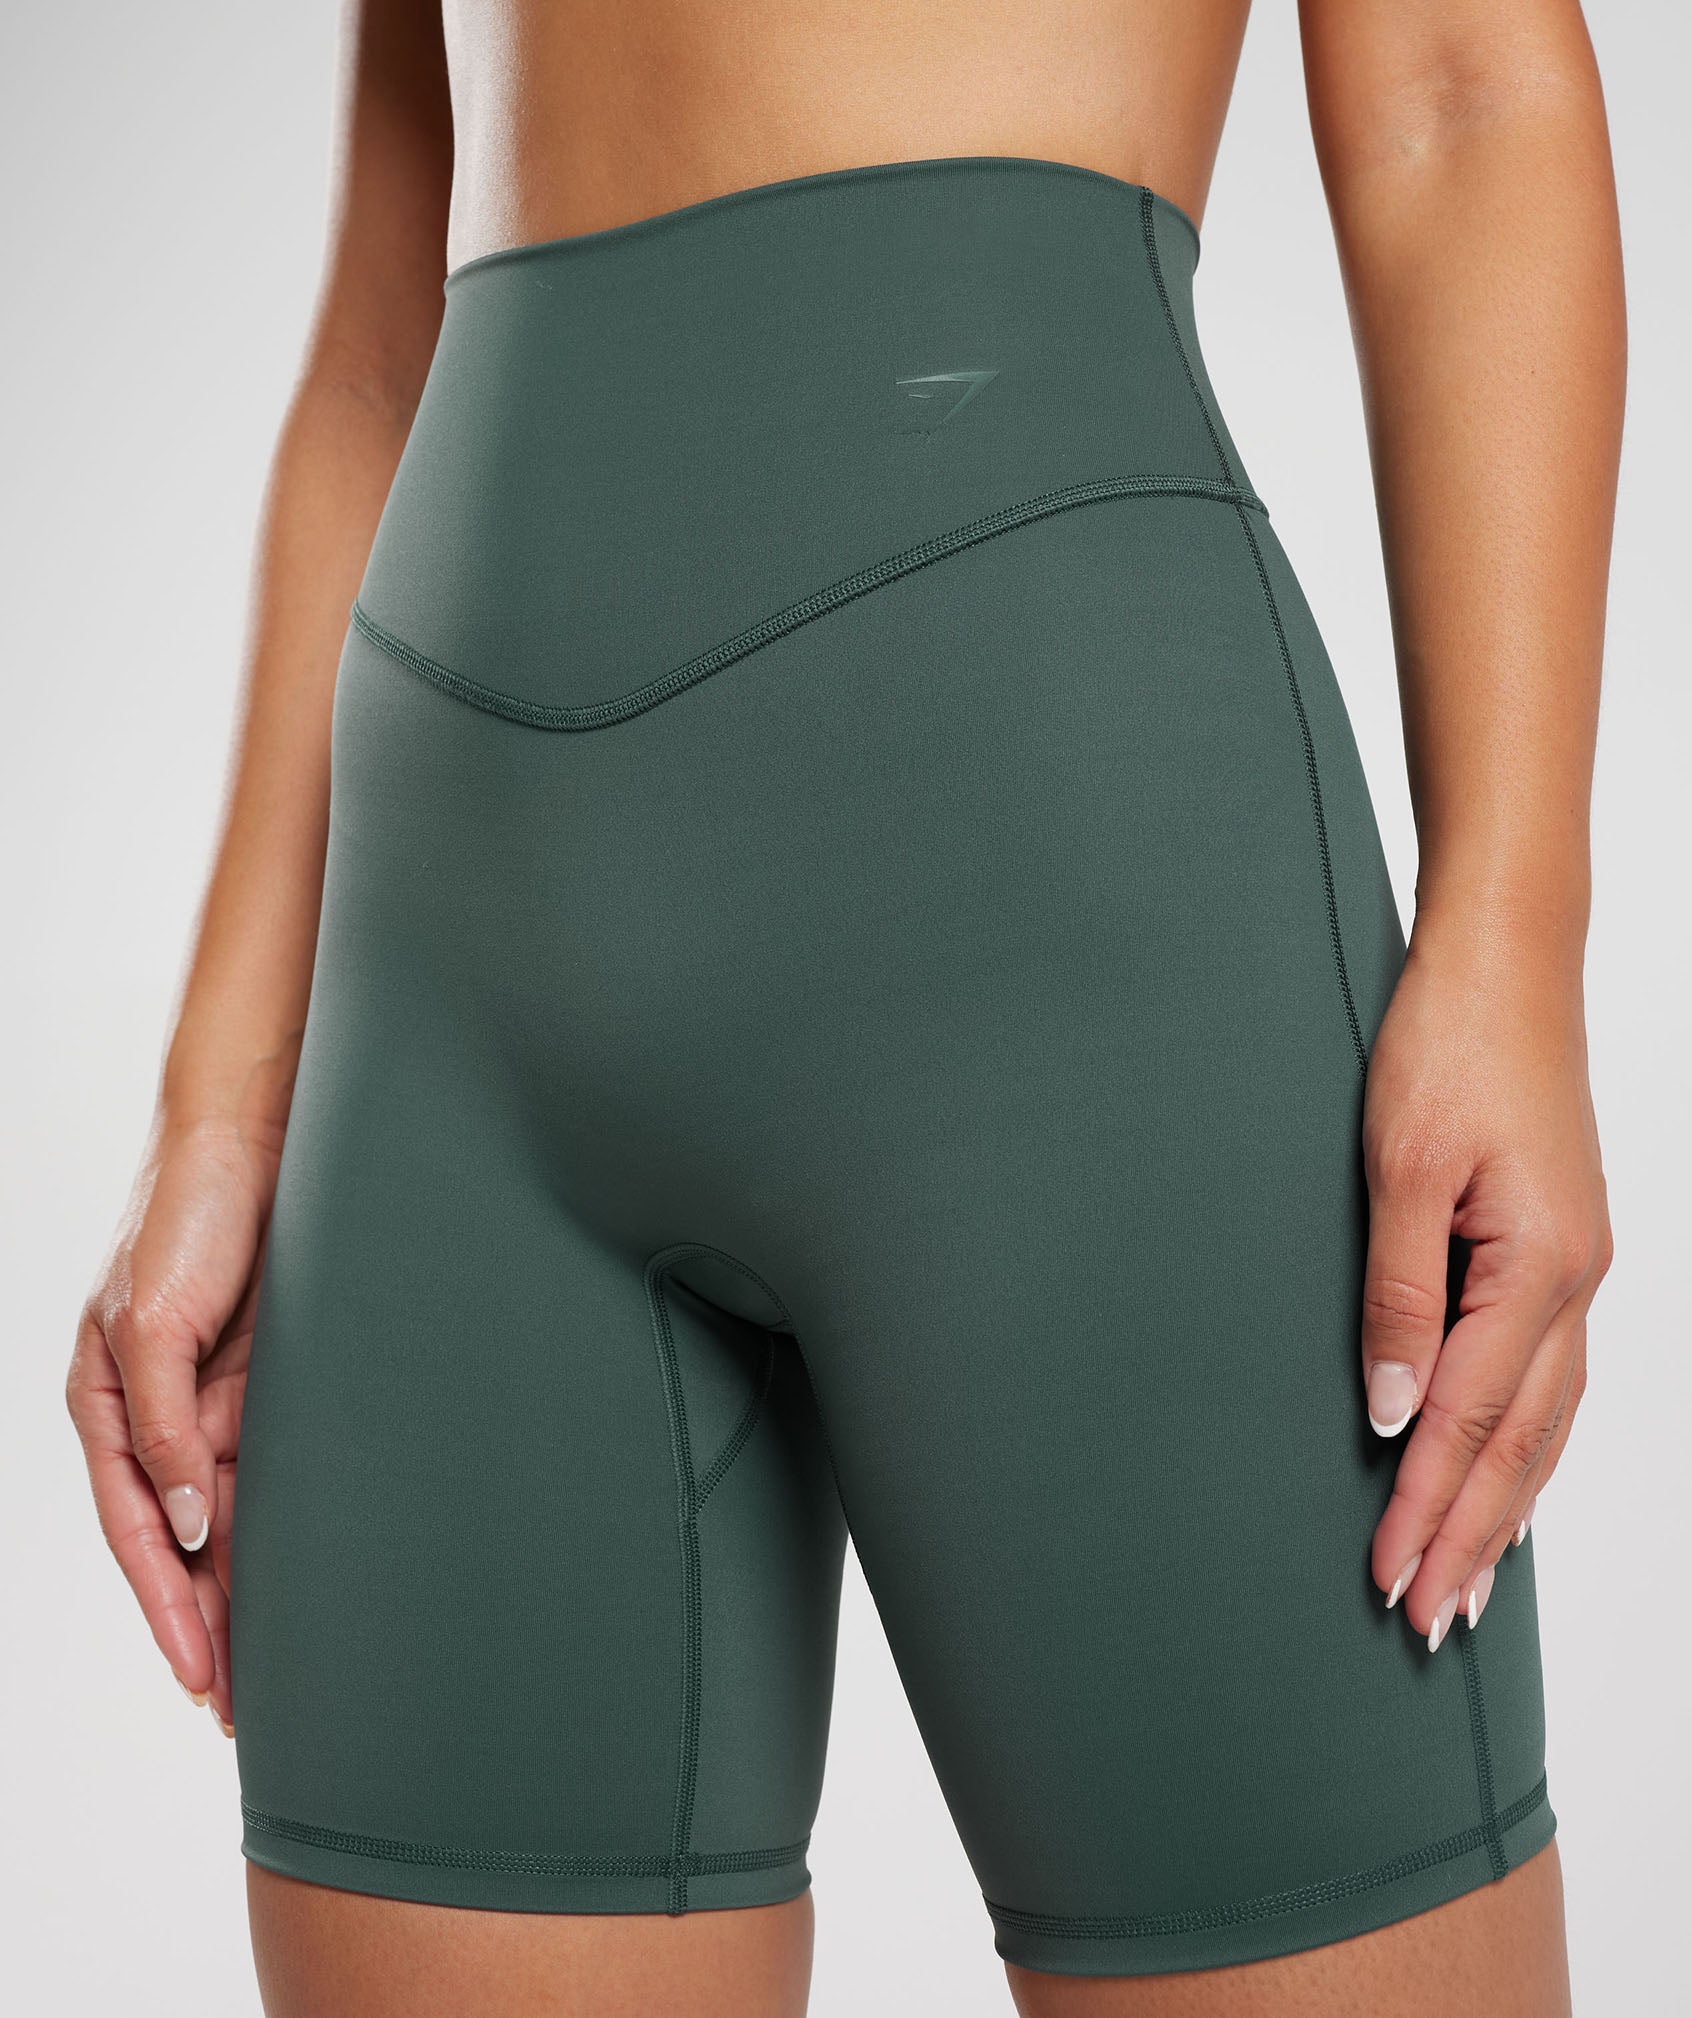 Elevate Cycling Shorts in Fog Green - view 6